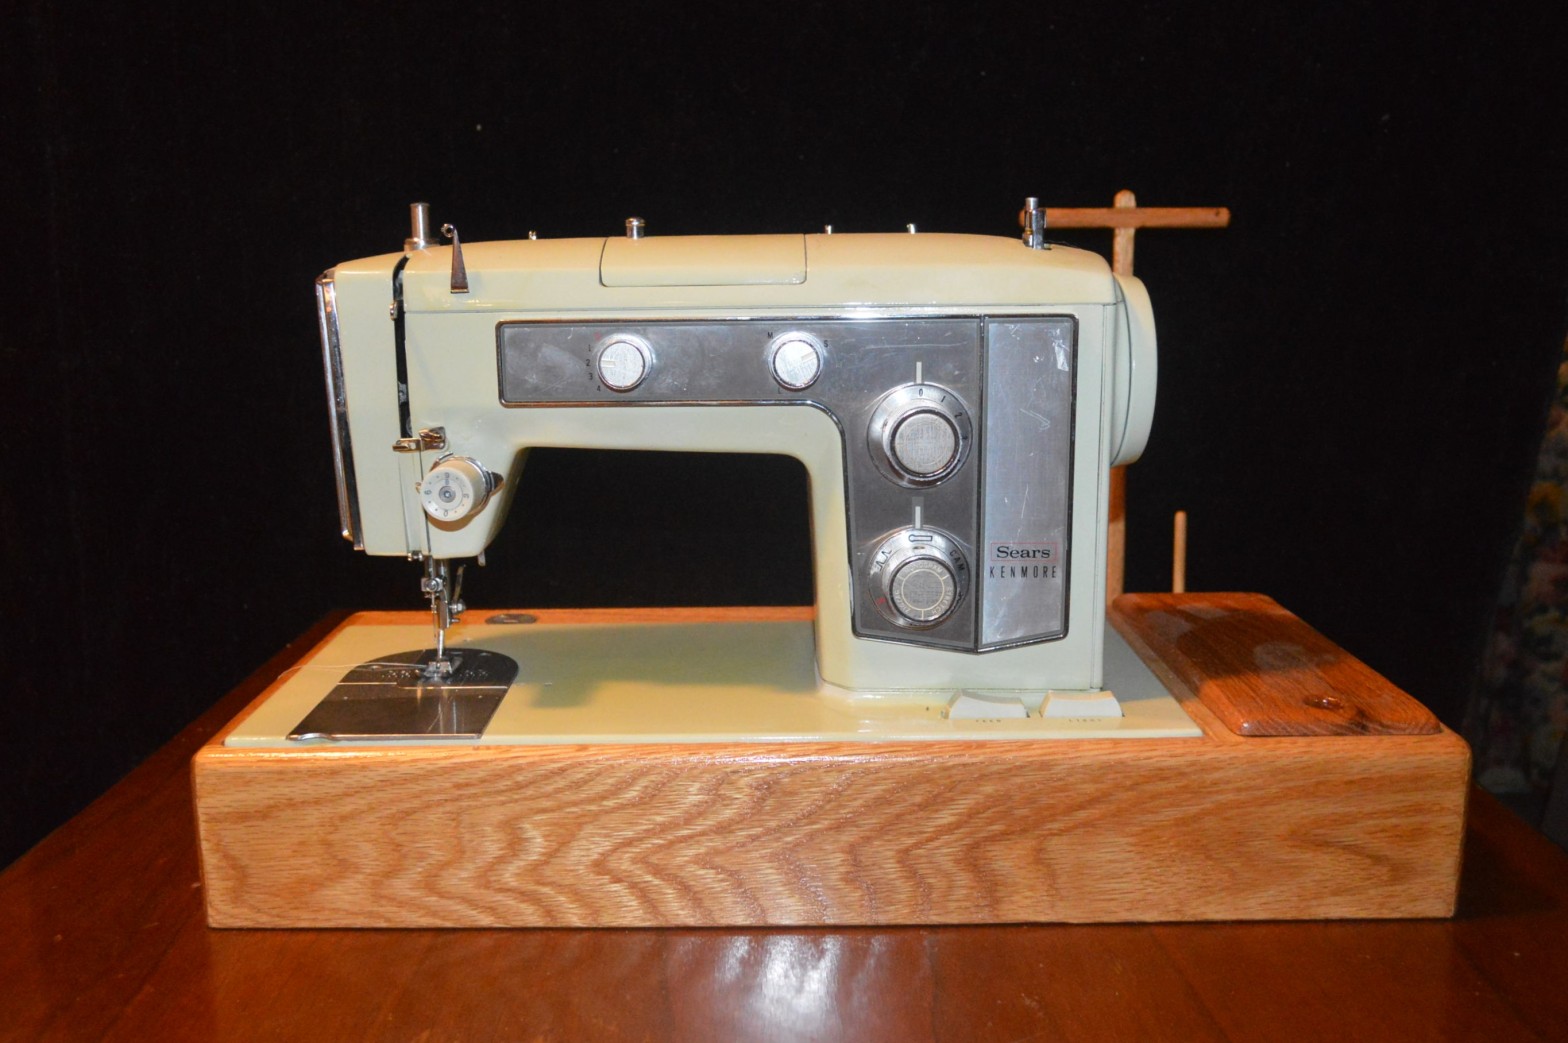 How Much Is My Old Sewing Machine Worth?